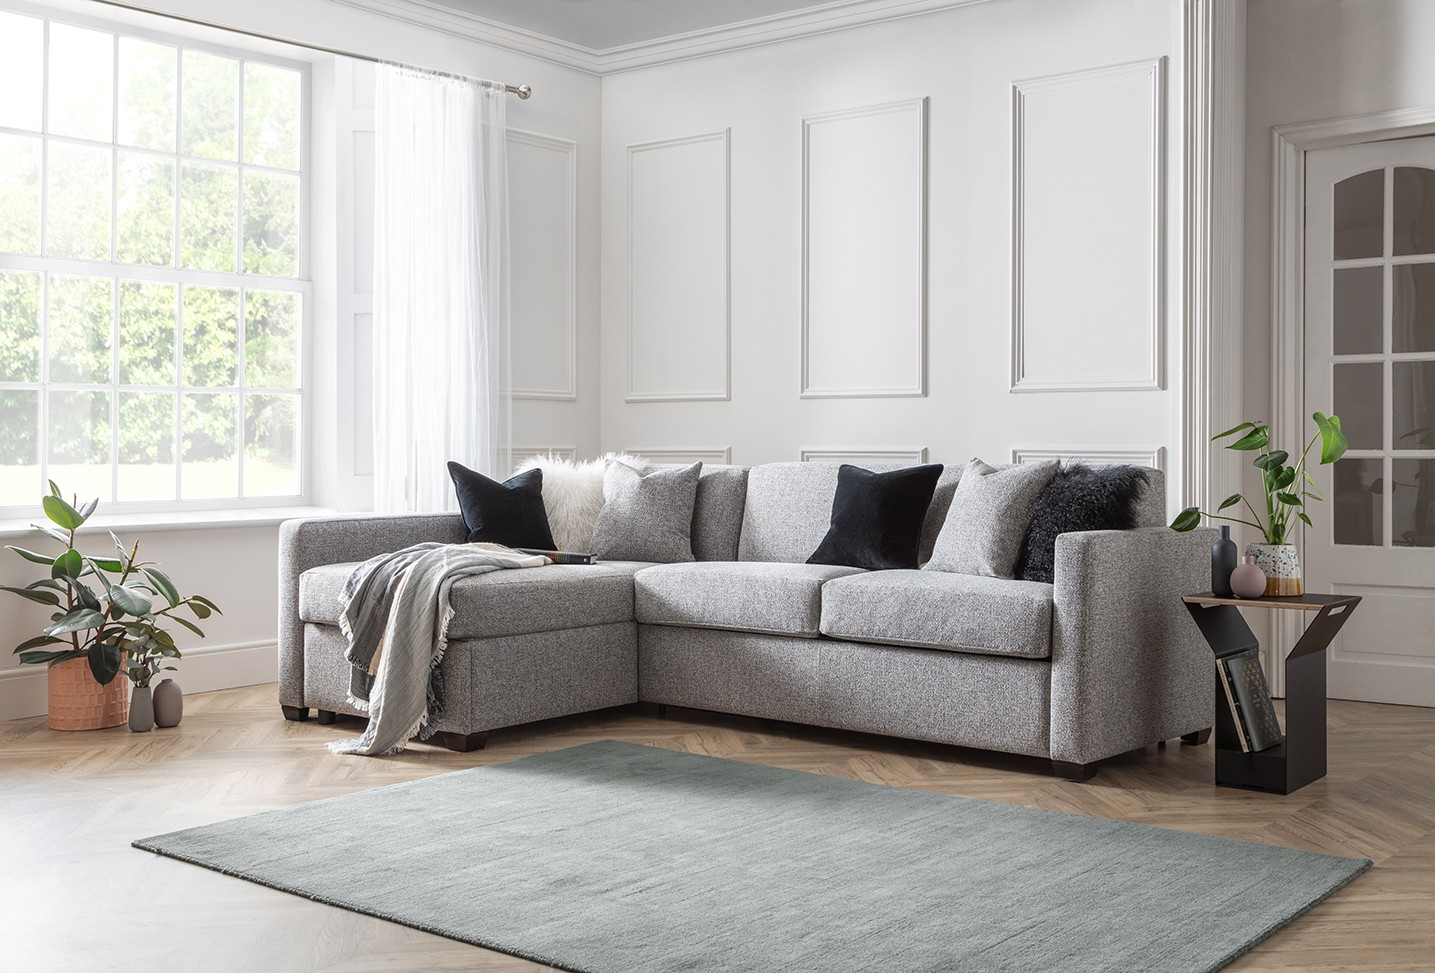 Metro 3 Seater Corner Sofa Bed with Chaise|Sofa Beds In Stock|Furl